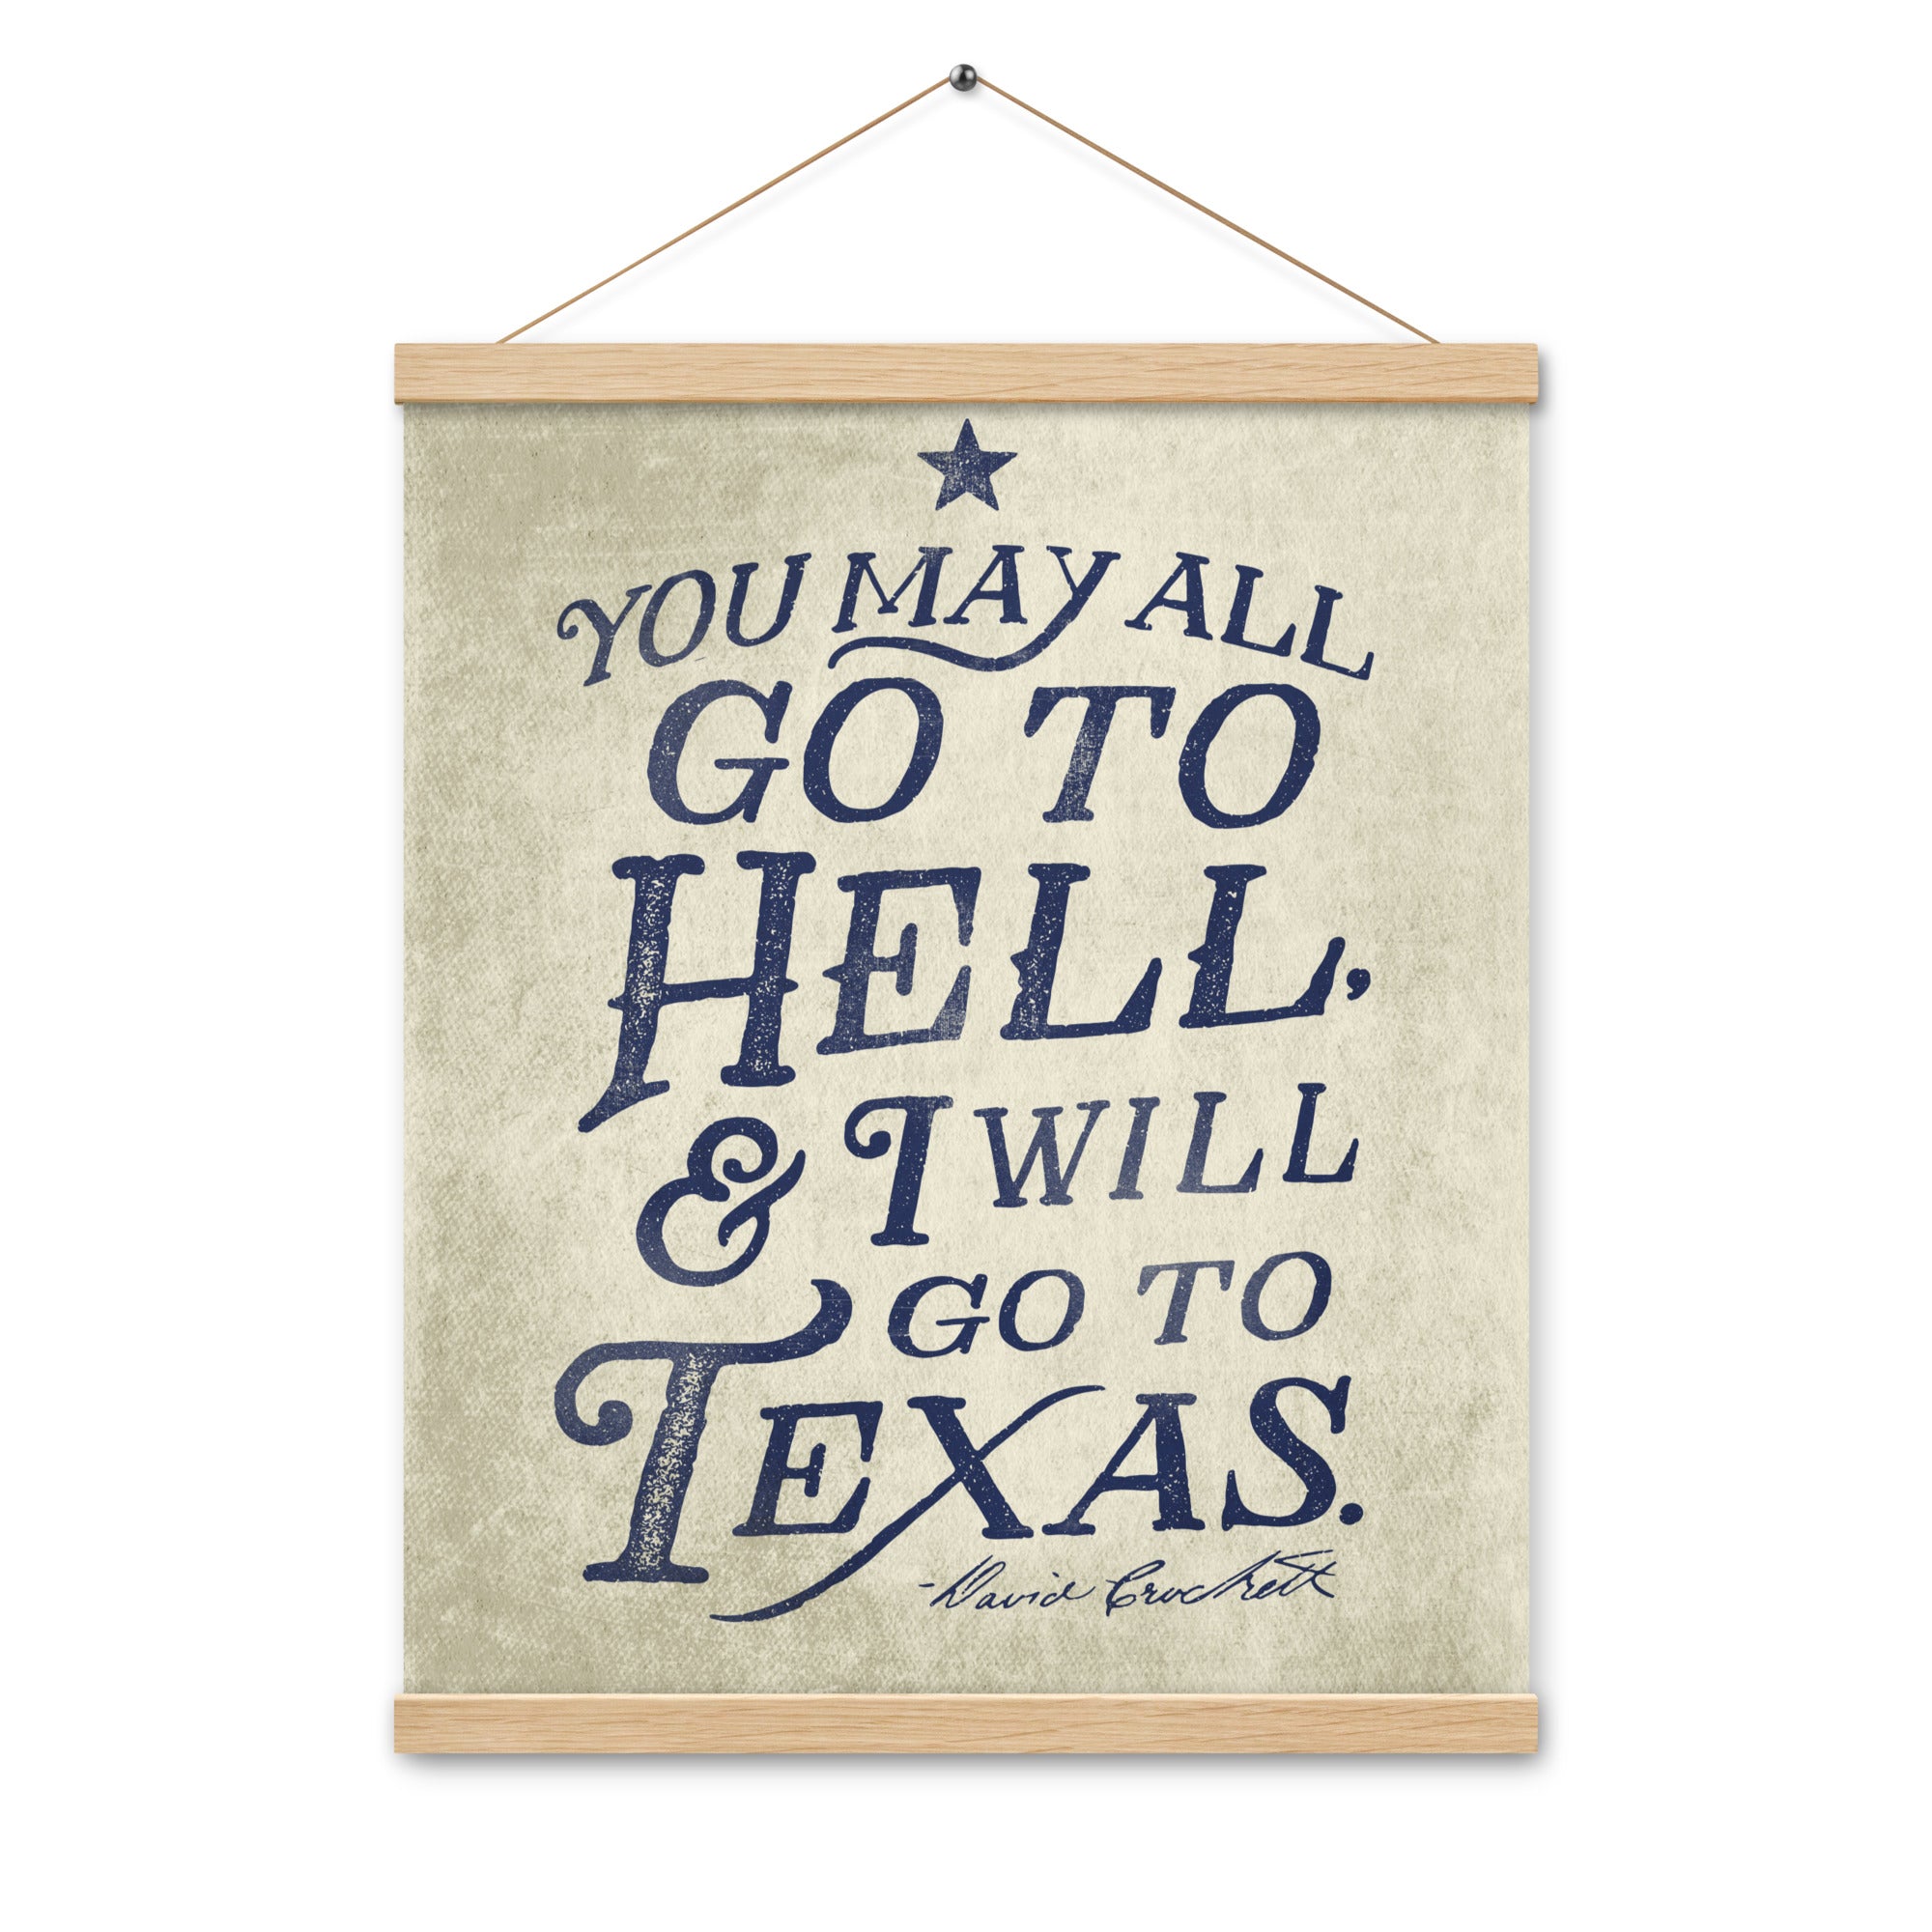 I Will Go To Texas Davy Crockett Quote Poster with hangers